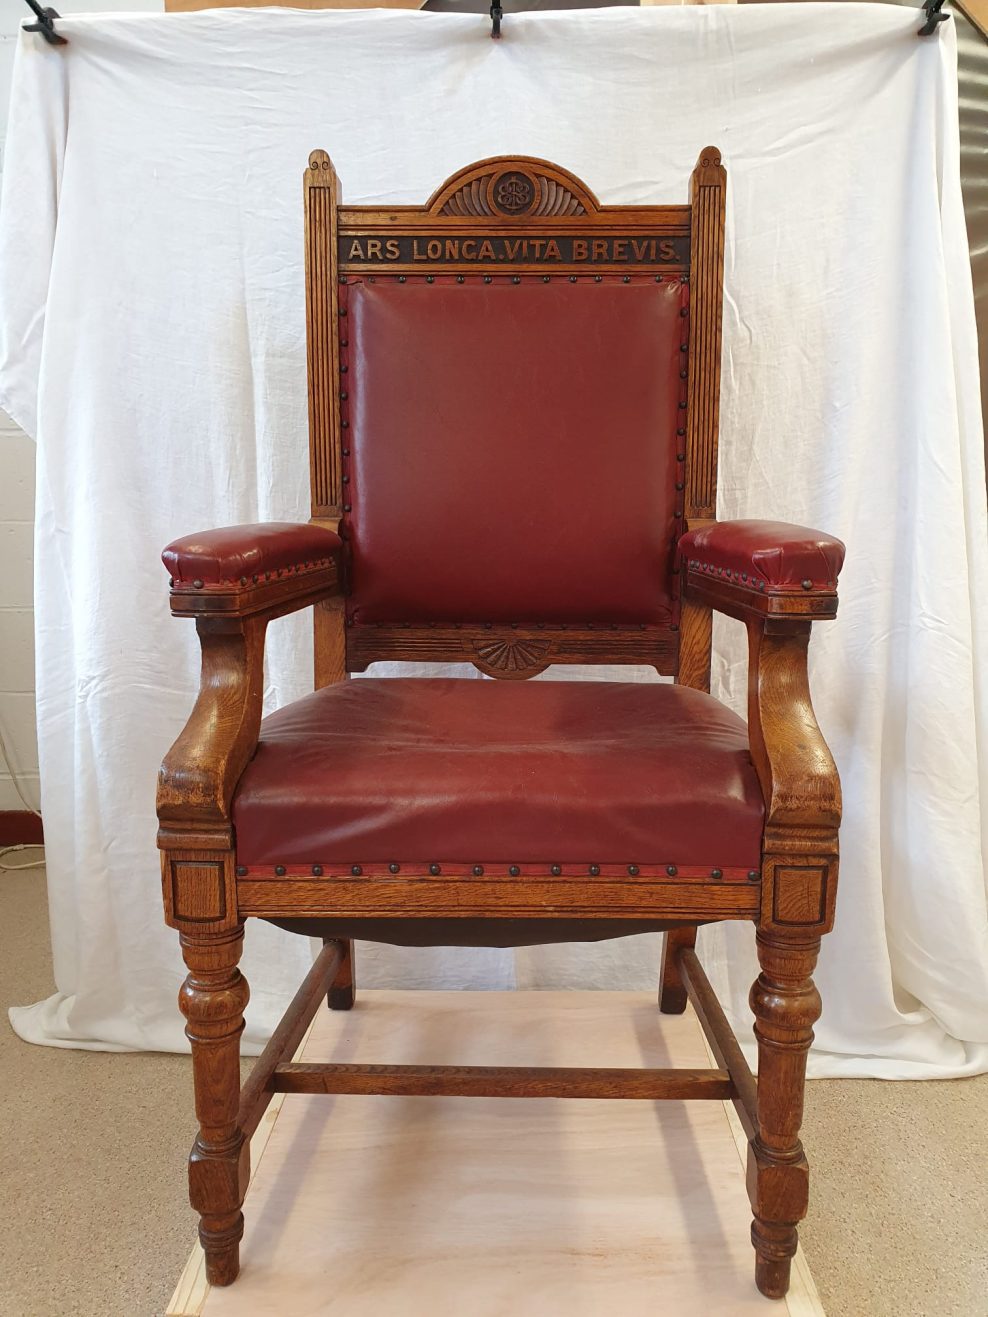 Chair conservation and re-upholstery